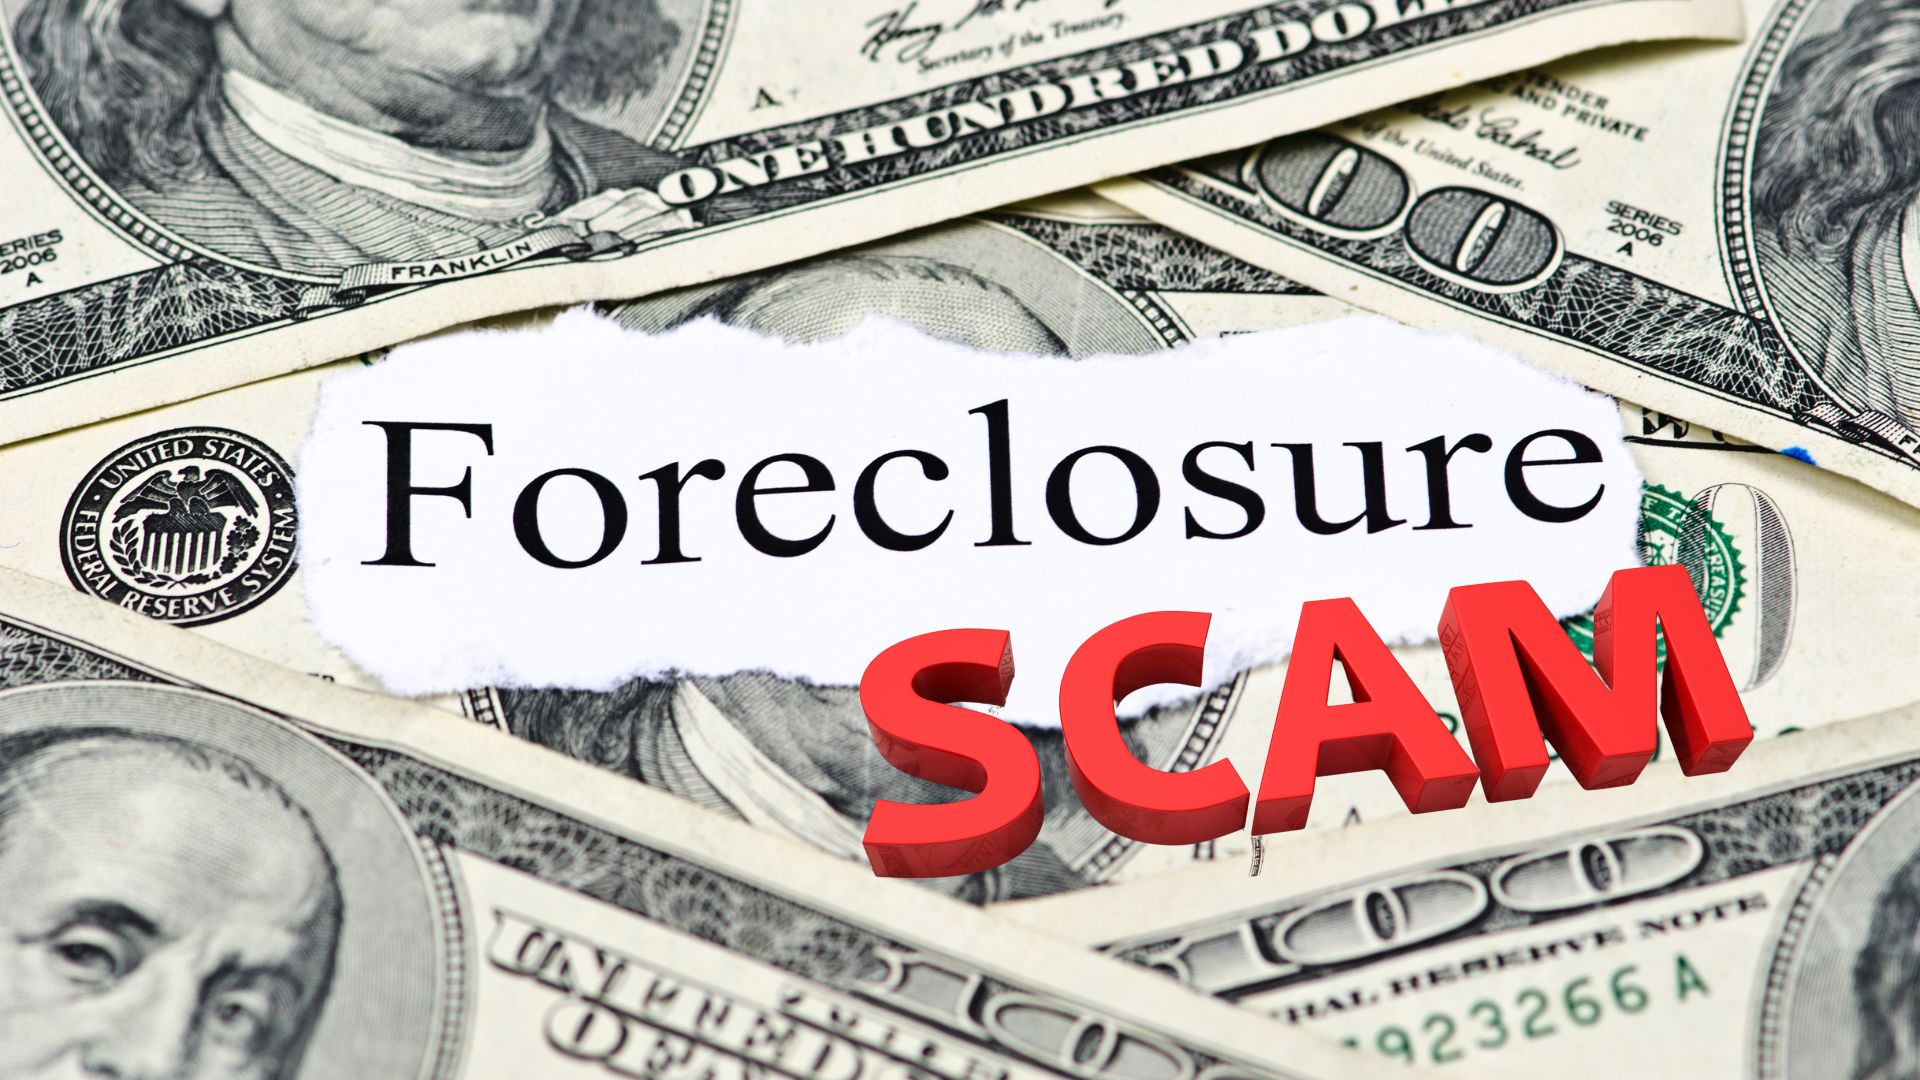 Foreclosure scam to watch out for